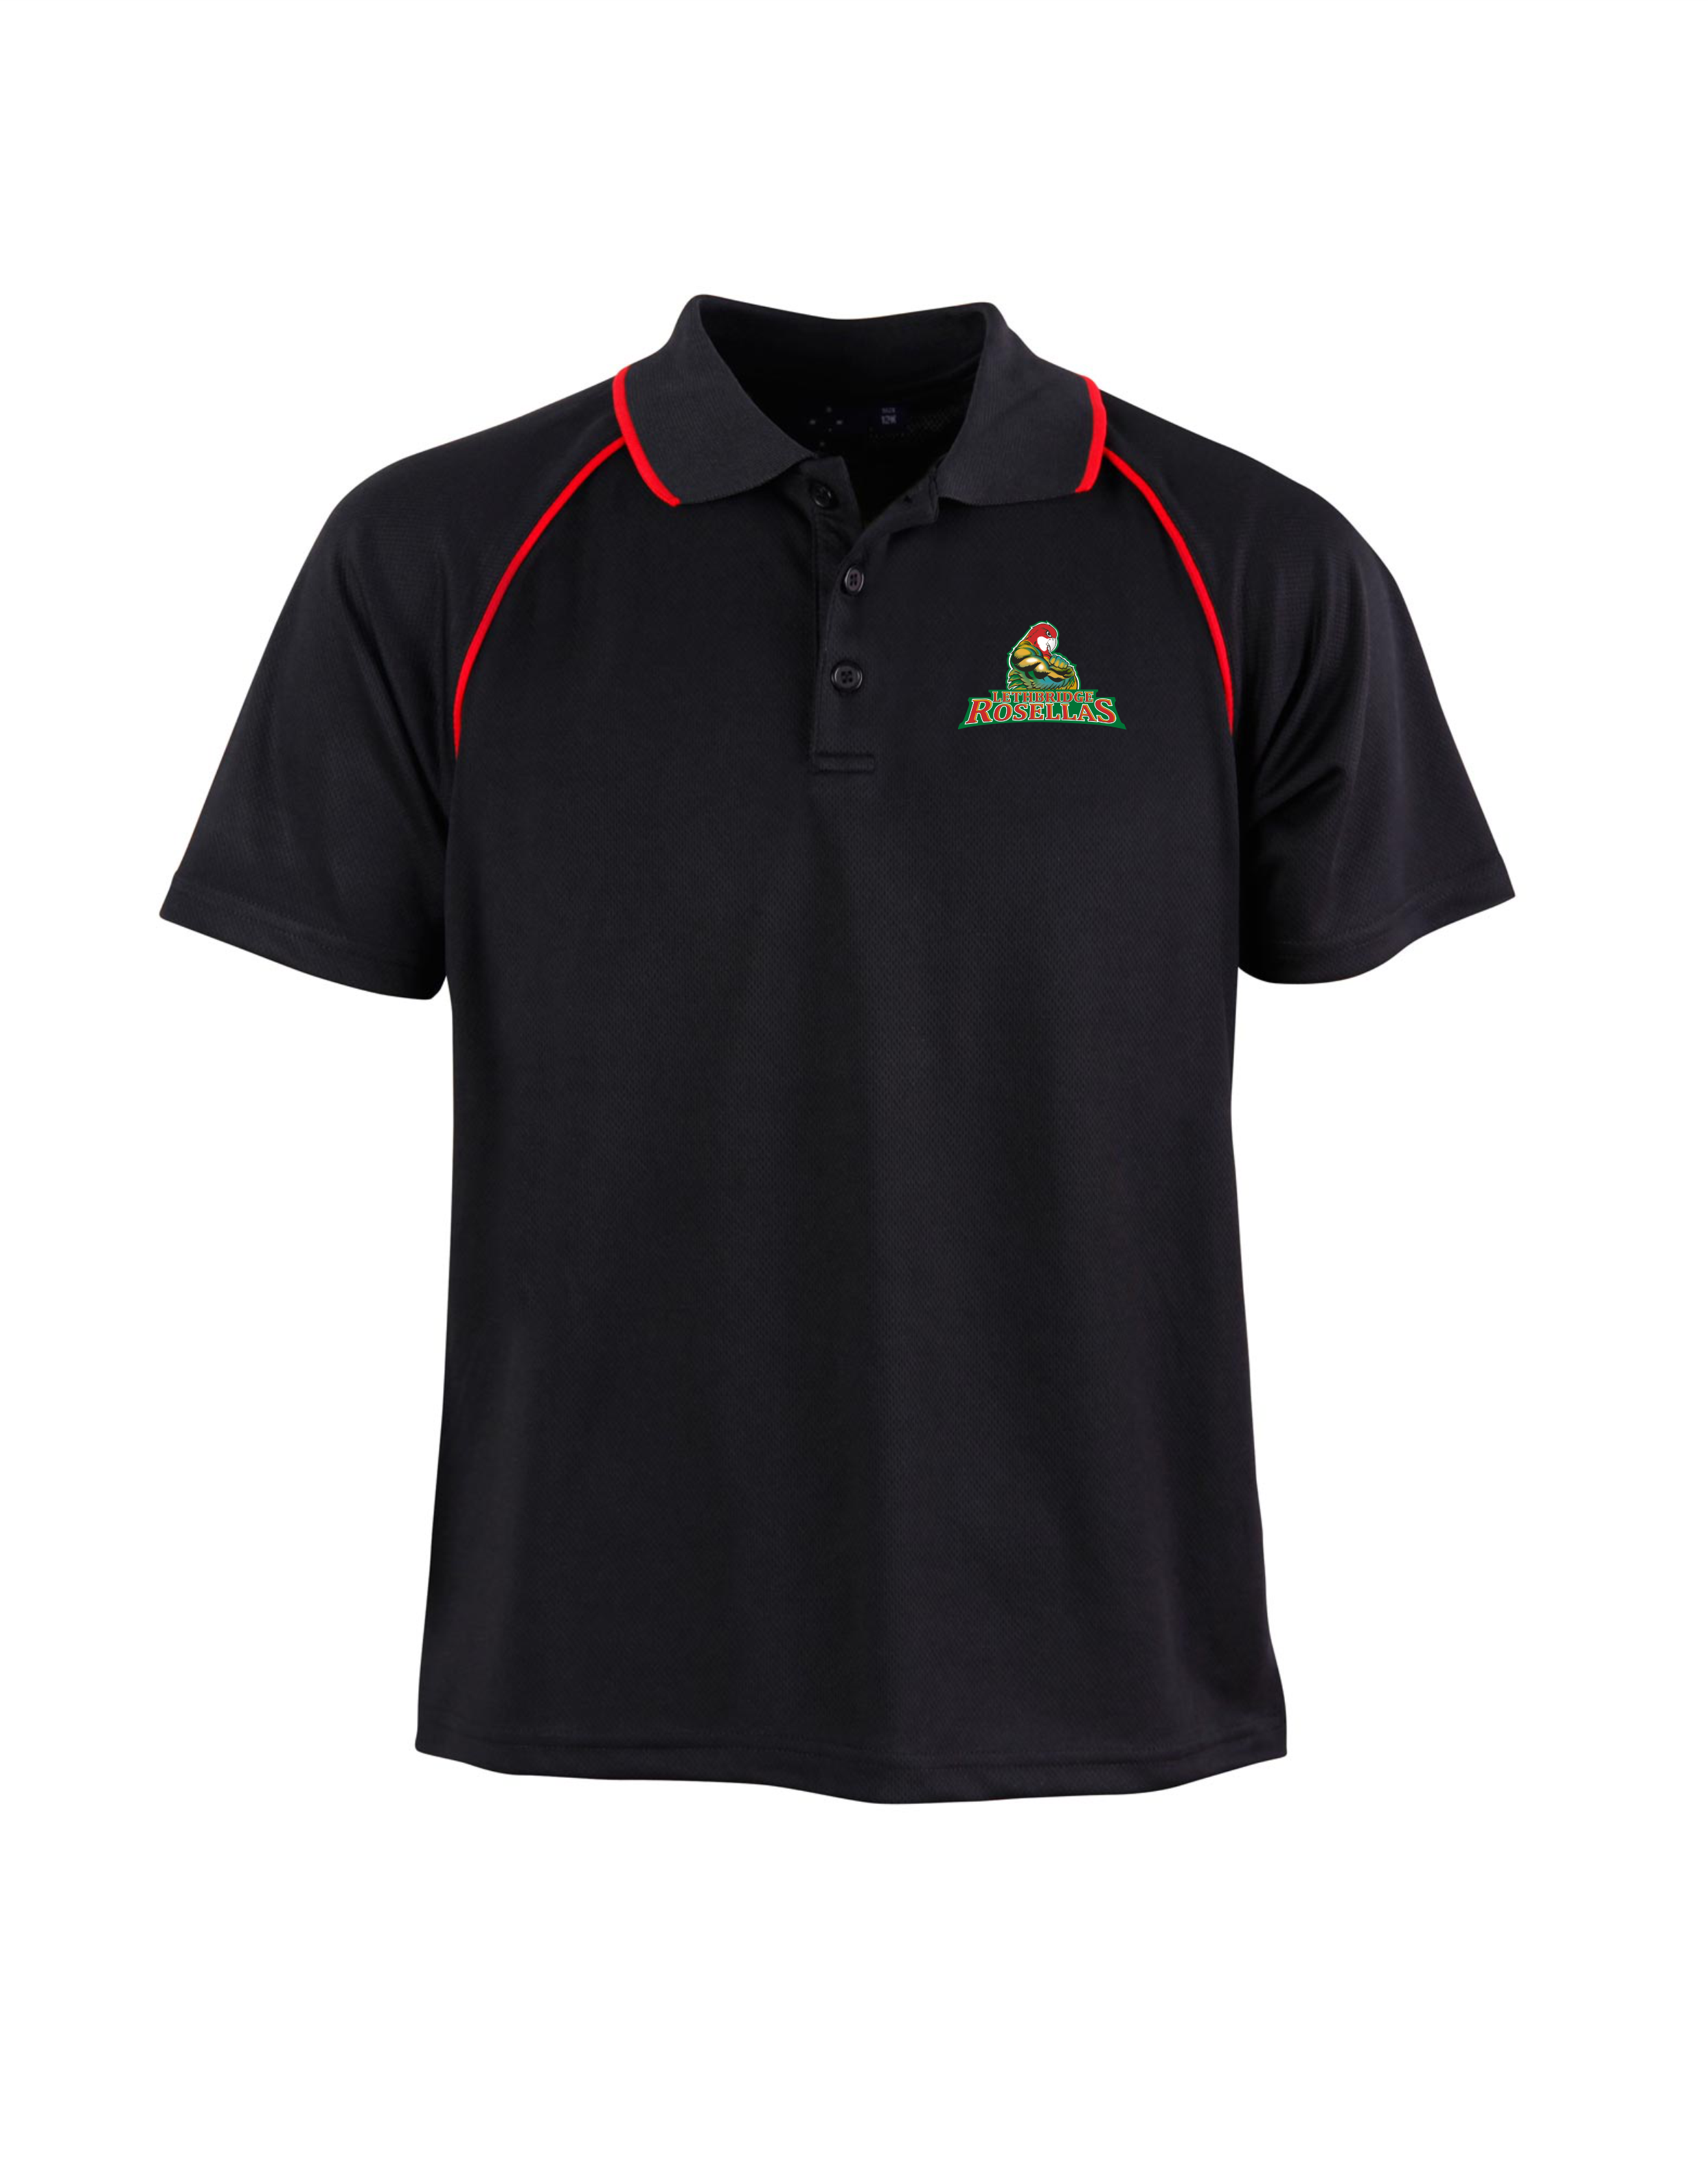 Kids Club Polo in Black/Red